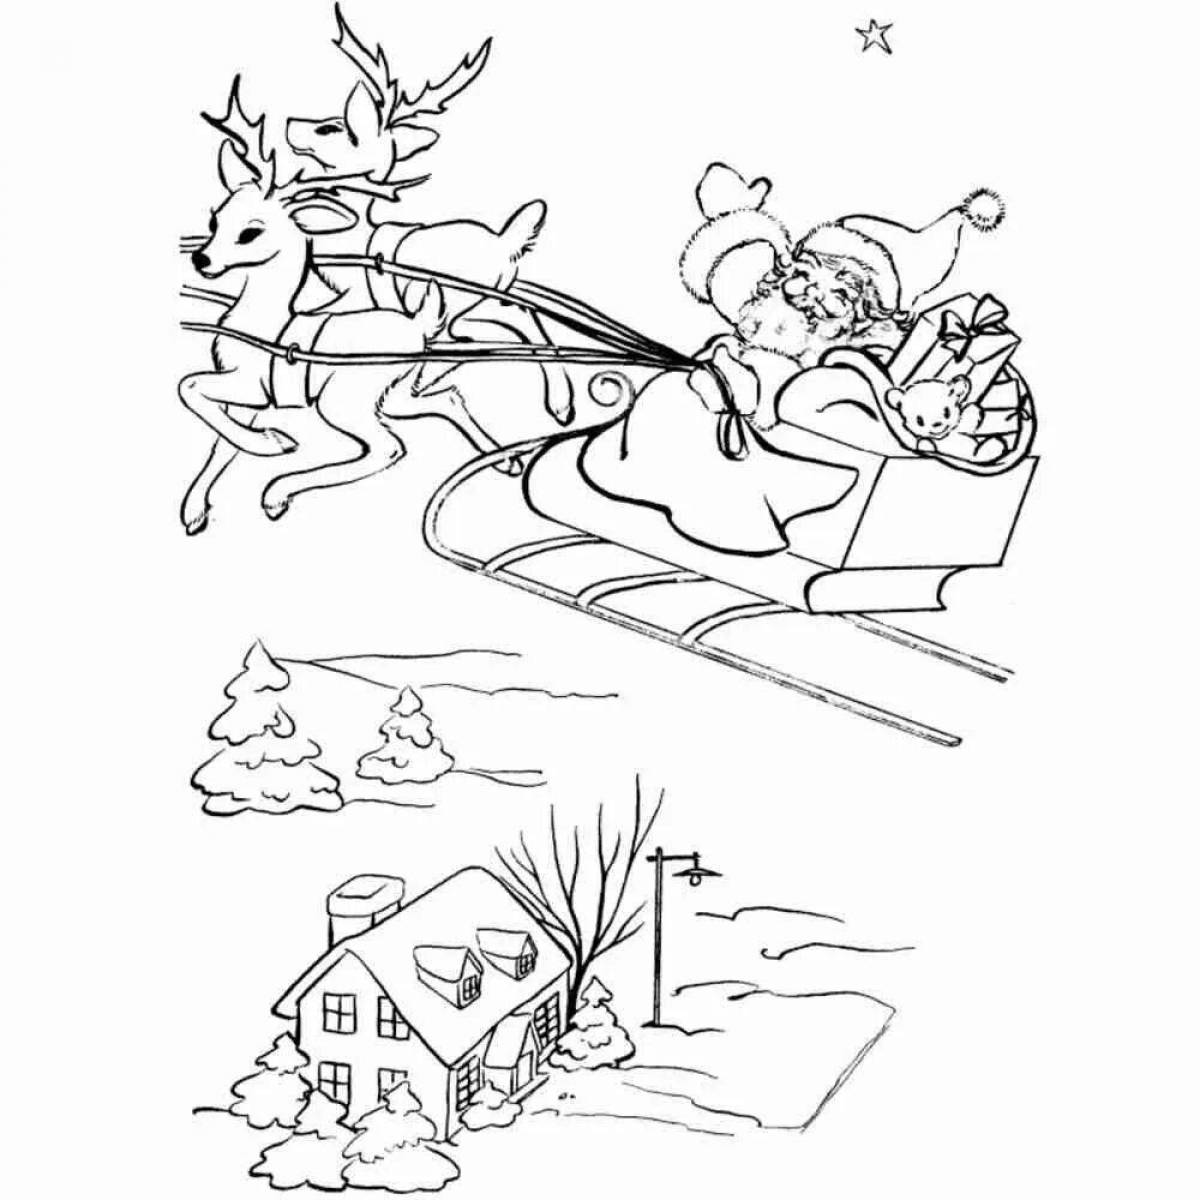 Coloring page playful Santa Claus on a sled